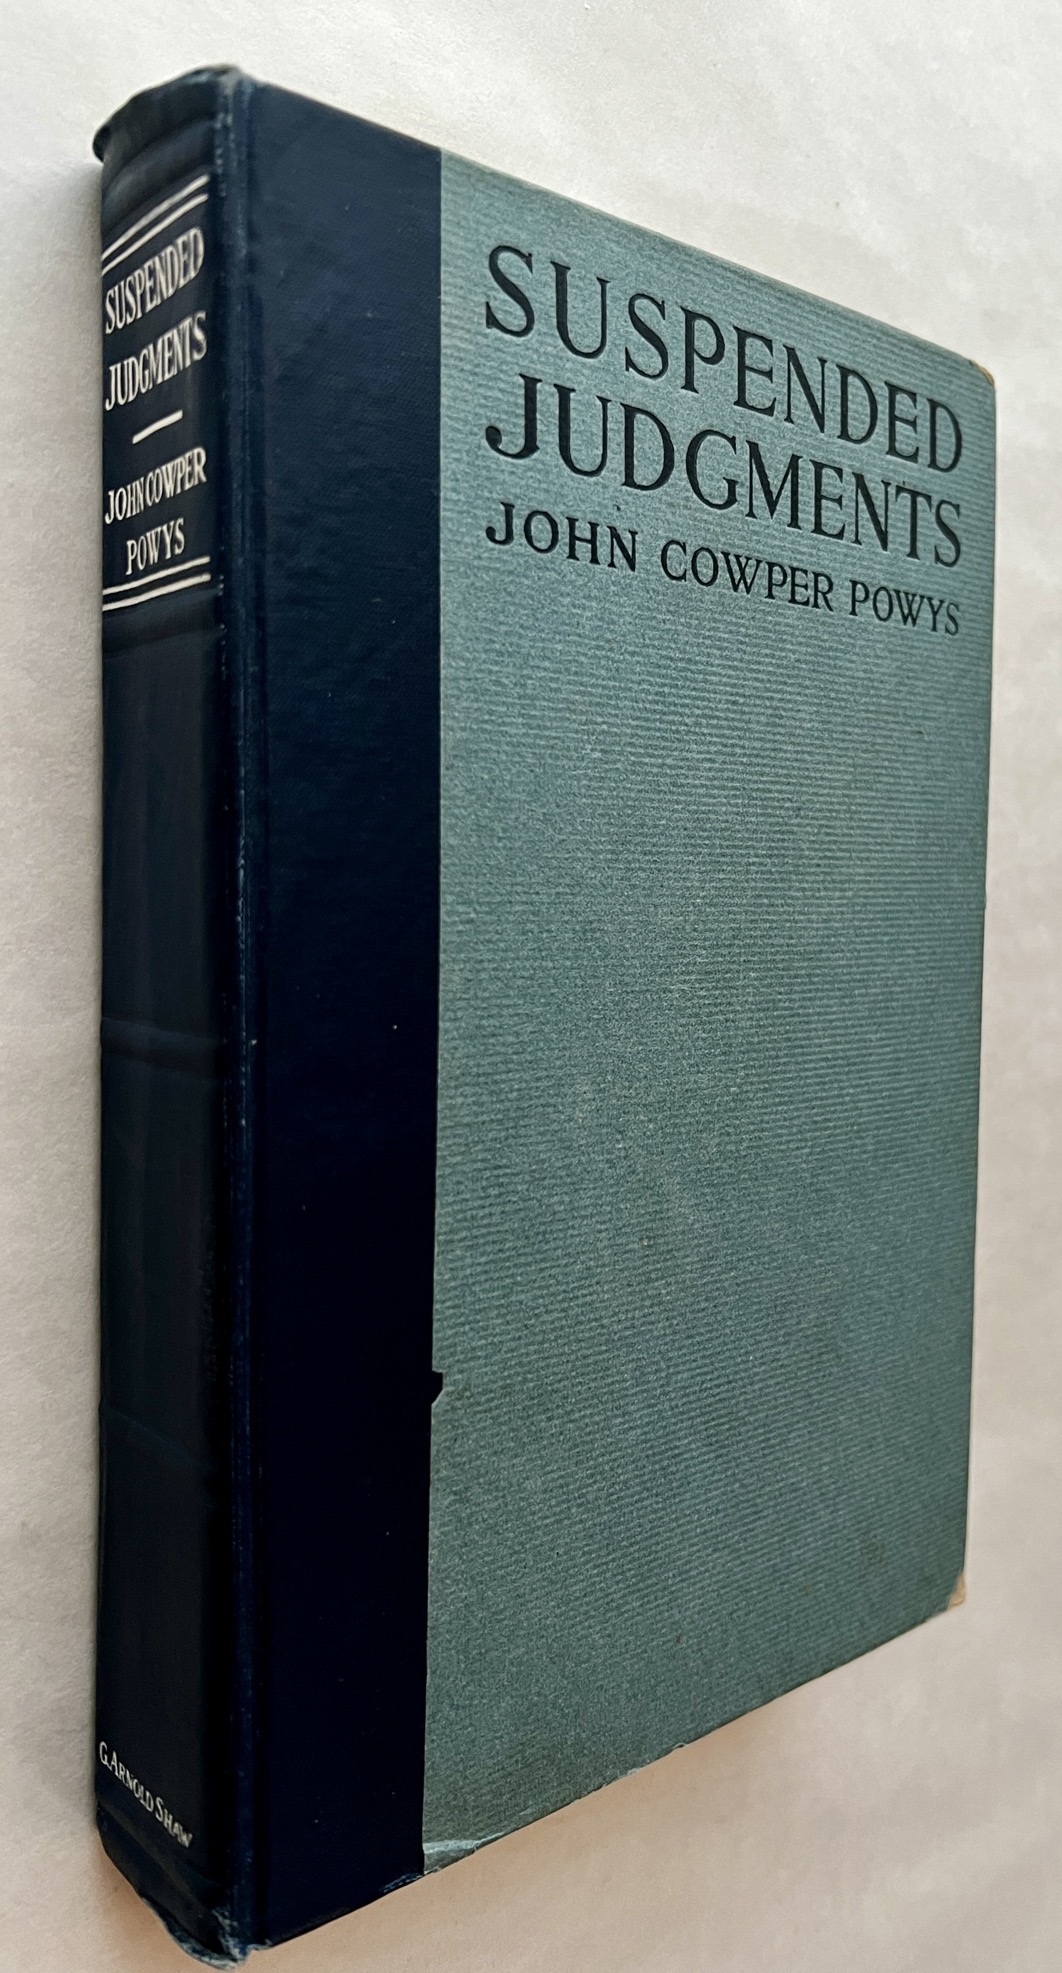 Suspended Judgments Essays On Books and Sensations - Powys, John Cowper